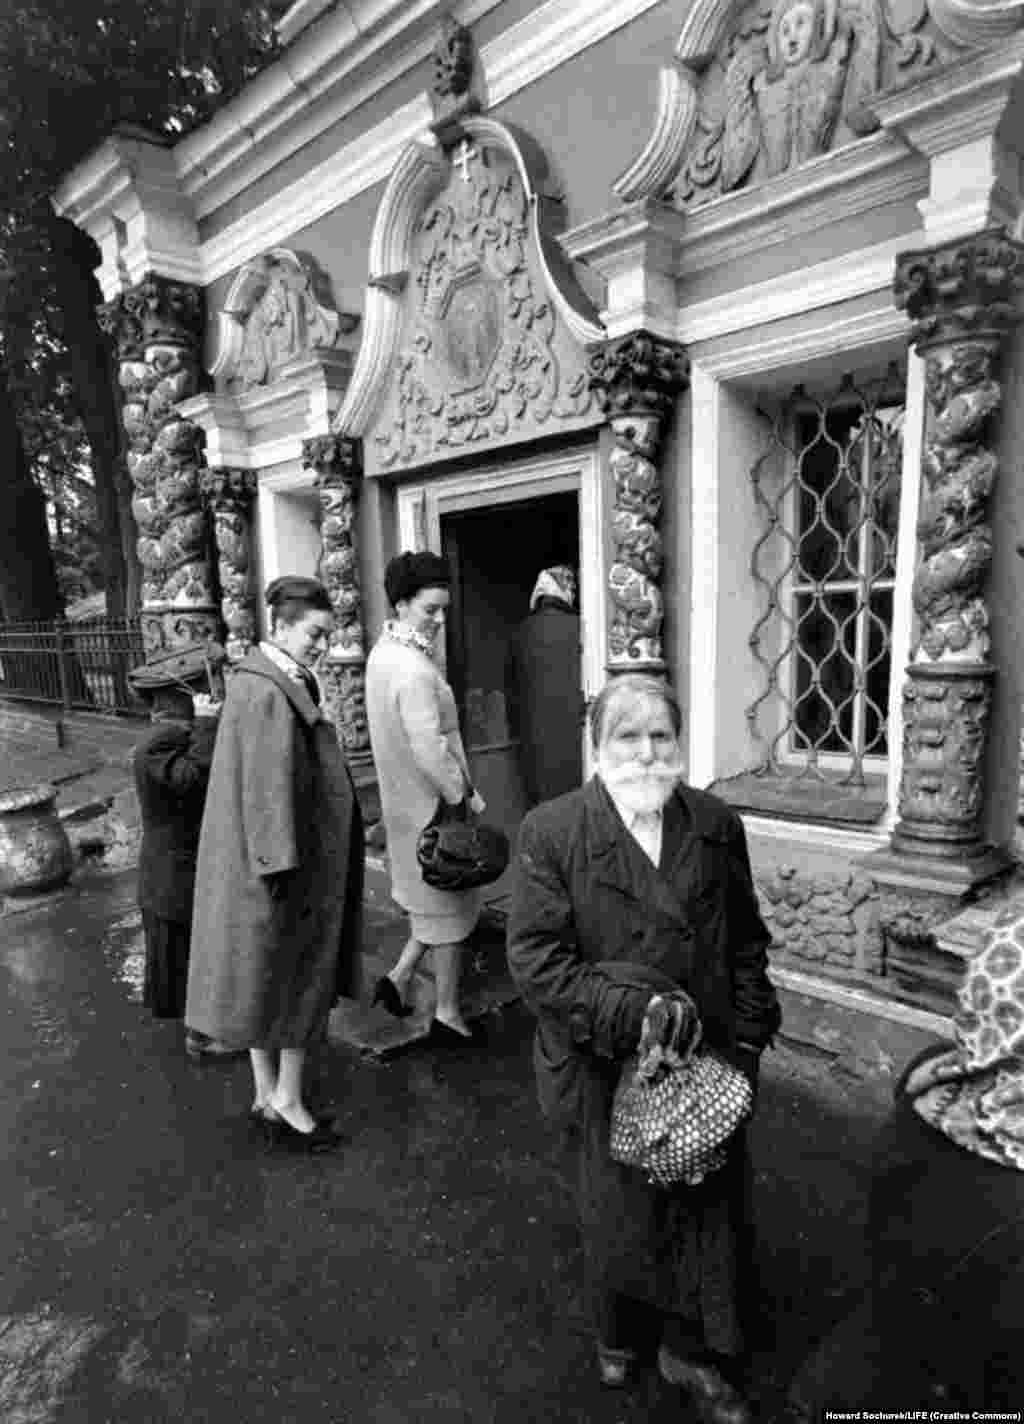 The foreign visitors check out a dapper Soviet gentleman as they head into a church on a rainy day.